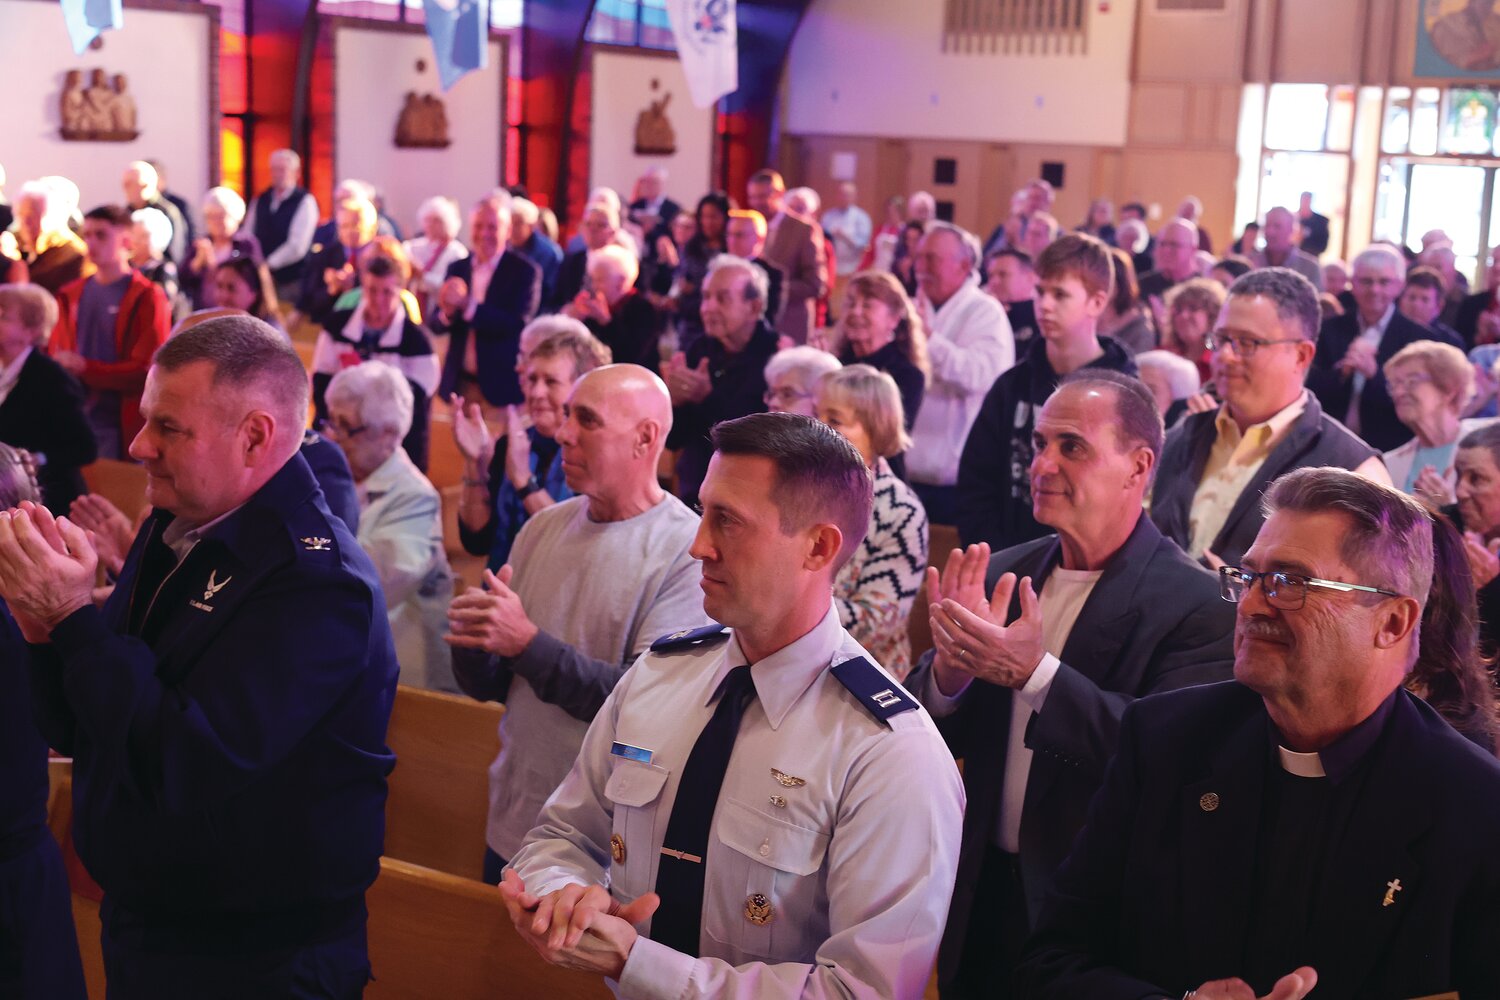 Many members of the R.I. Air National Guard leadership, as well as Father Thurber’s family, friends and parishioners applaud at St. Barnabas after he takes the oath of office.